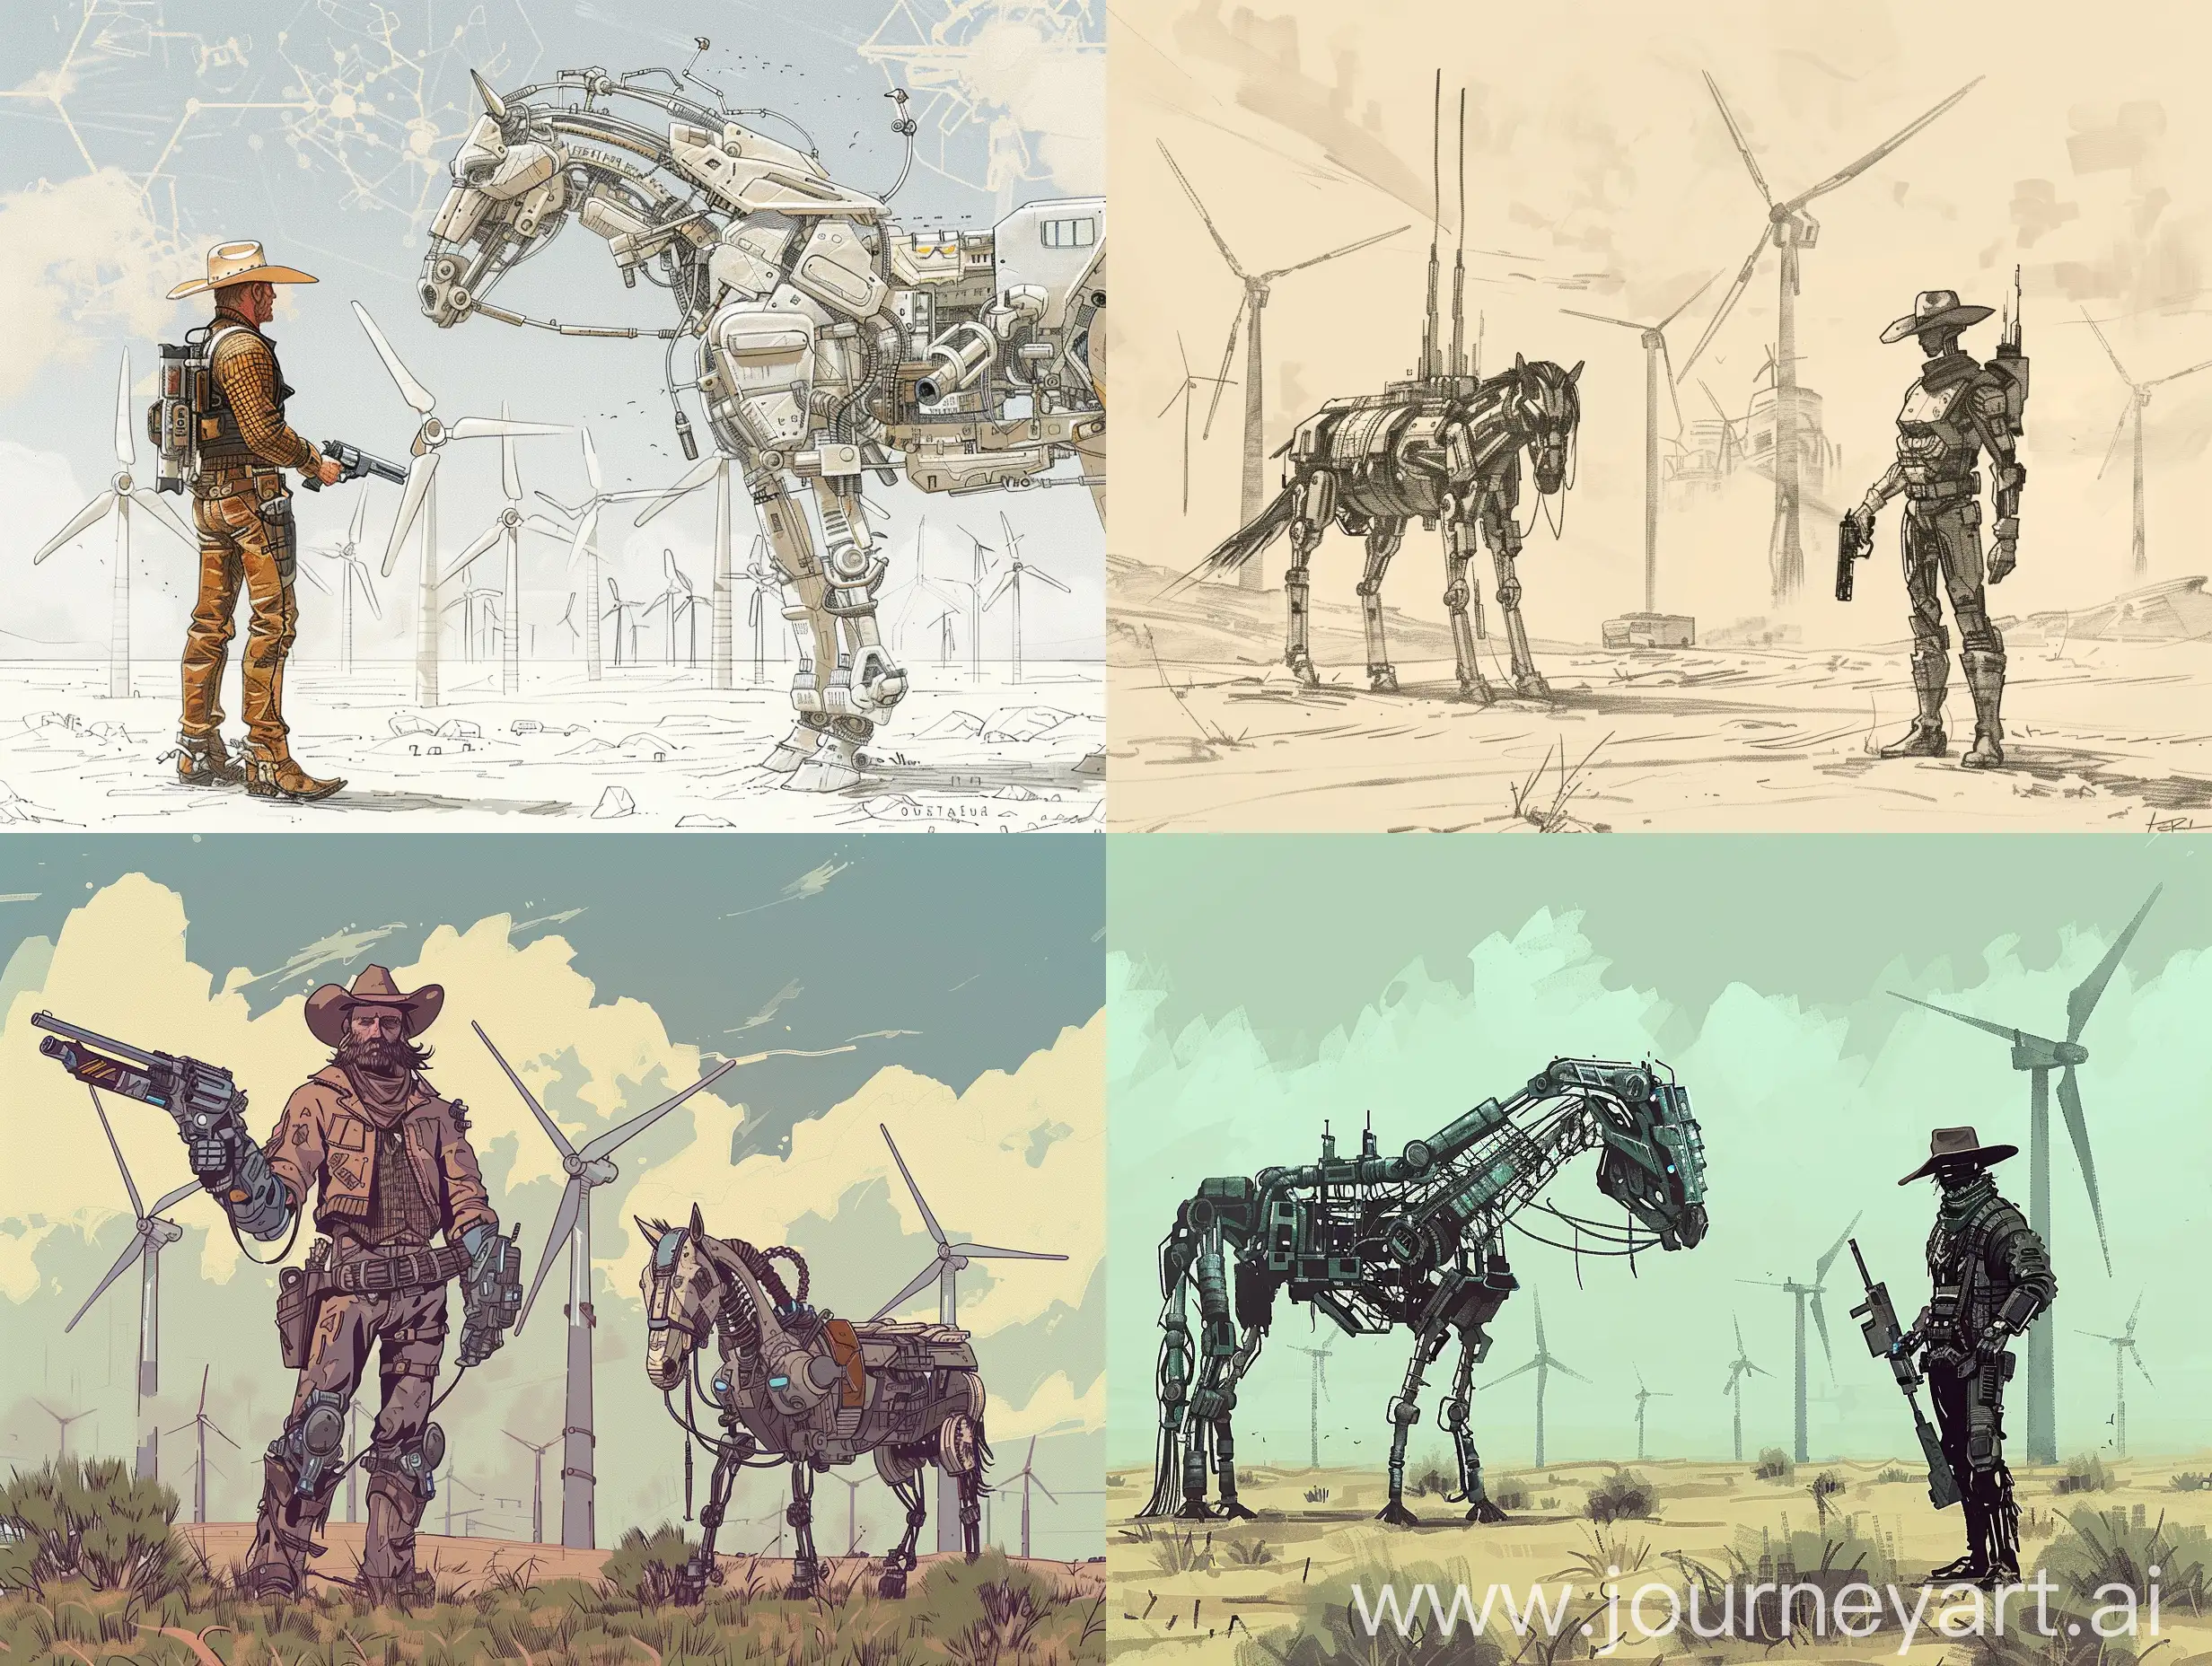 Futuristic-Cowboy-with-CyberGuns-and-Robot-Horse-in-Texas-Windmills